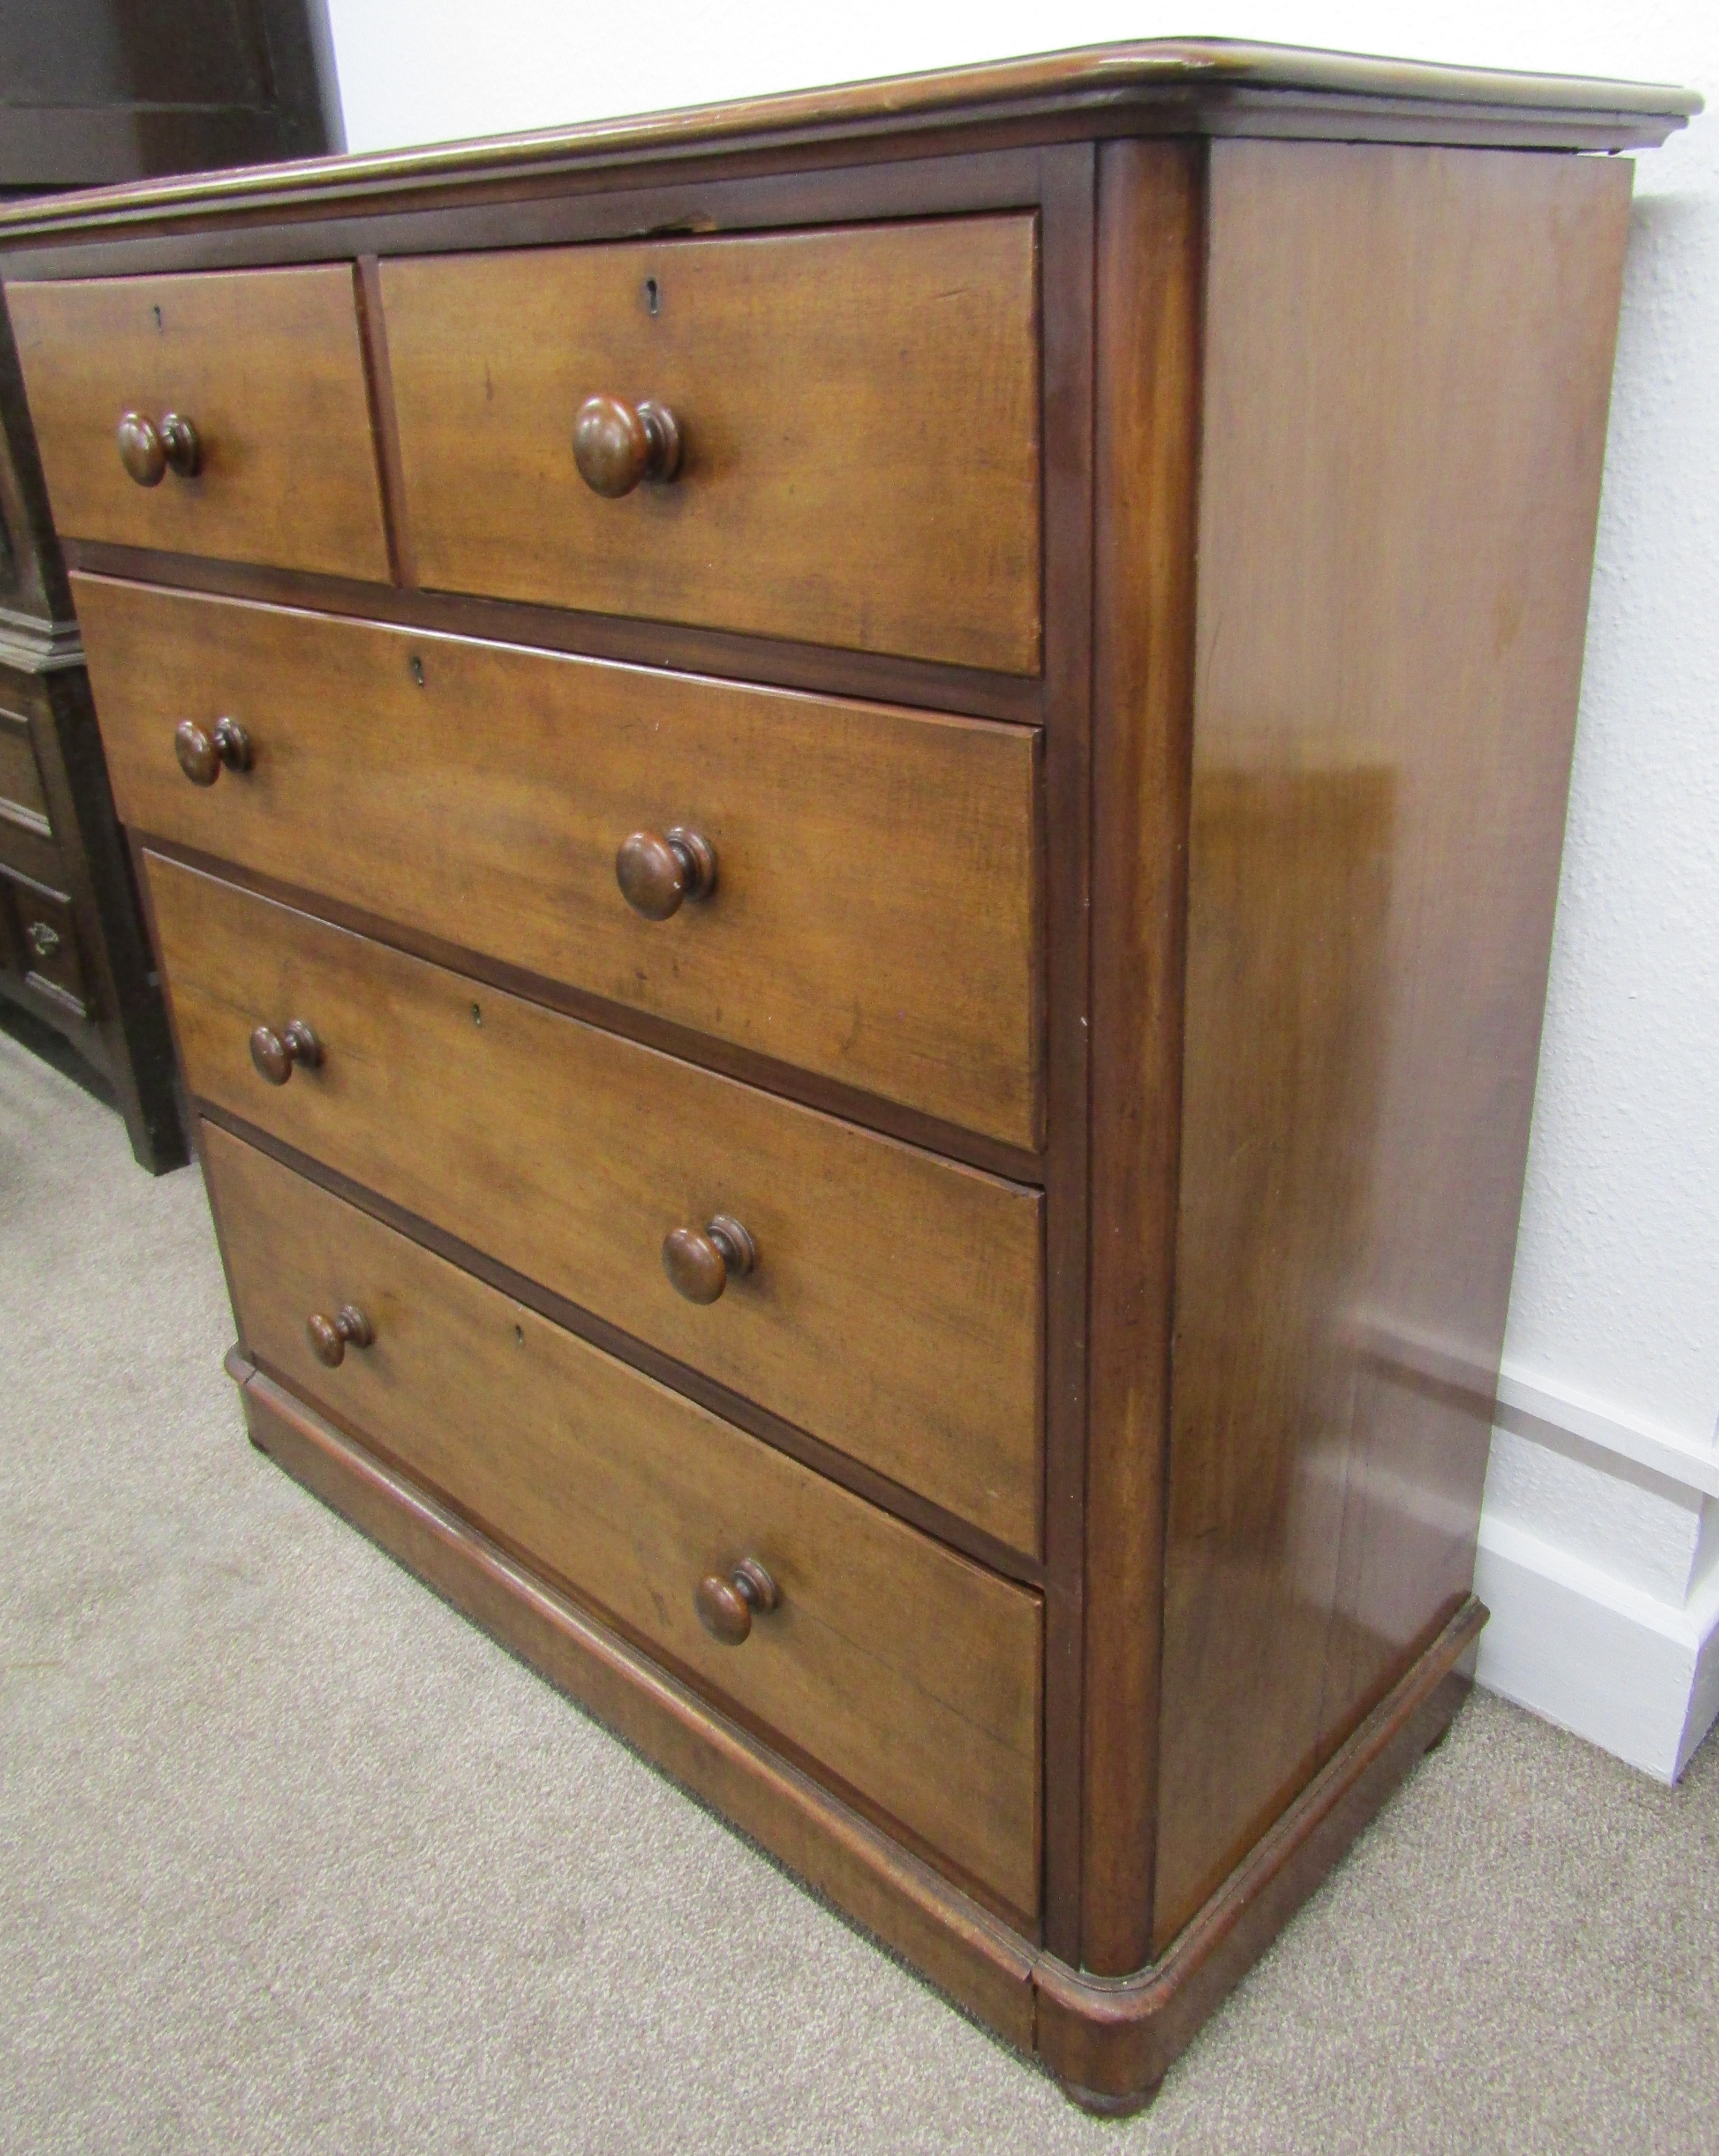 Large Victorian mahogany chest of drawers - approx. 120cm x 52.5cm x 119.5cm - Image 3 of 4